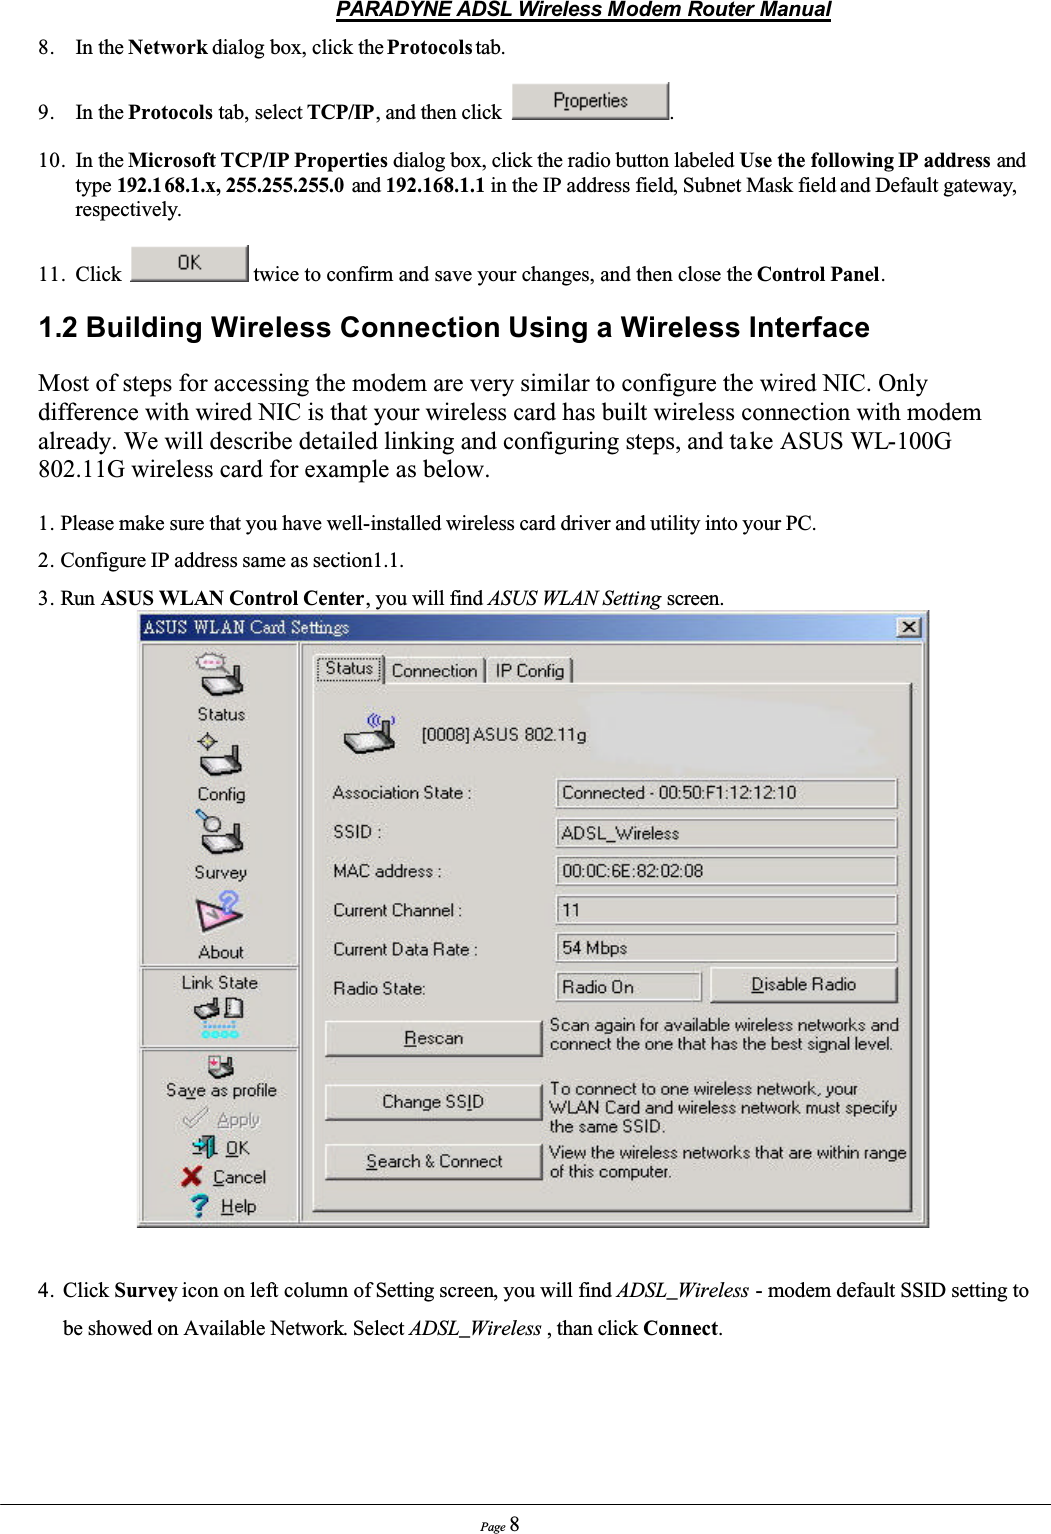 PARADYNE ADSL Wireless Modem Router ManualPage 88. In the Network dialog box, click the Protocols tab.9. In the Protocols tab, select TCP/IP, and then click  .10. In the Microsoft TCP/IP Properties dialog box, click the radio button labeled Use the following IP address and type 192.1 68.1.x, 255.255.255.0 and 192.168.1.1 in the IP address field, Subnet Mask field and Default gateway,respectively.11. Click  twice to confirm and save your changes, and then close the Control Panel.1.2 Building Wireless Connection Using a Wireless InterfaceMost of steps for accessing the modem are very similar to configure the wired NIC. Only difference with wired NIC is that your wireless card has built wireless connection with modem already. We will describe detailed linking and configuring steps, and take ASUS WL-100G802.11G wireless card for example as below. 1. Please make sure that you have well-installed wireless card driver and utility into your PC.2. Configure IP address same as section1.1.3. Run ASUS WLAN Control Center, you will find ASUS WLAN Setting screen.4. Click Survey icon on left column of Setting screen, you will find ADSL_Wireless - modem default SSID setting tobe showed on Available Network. Select ADSL_Wireless , than click Connect.